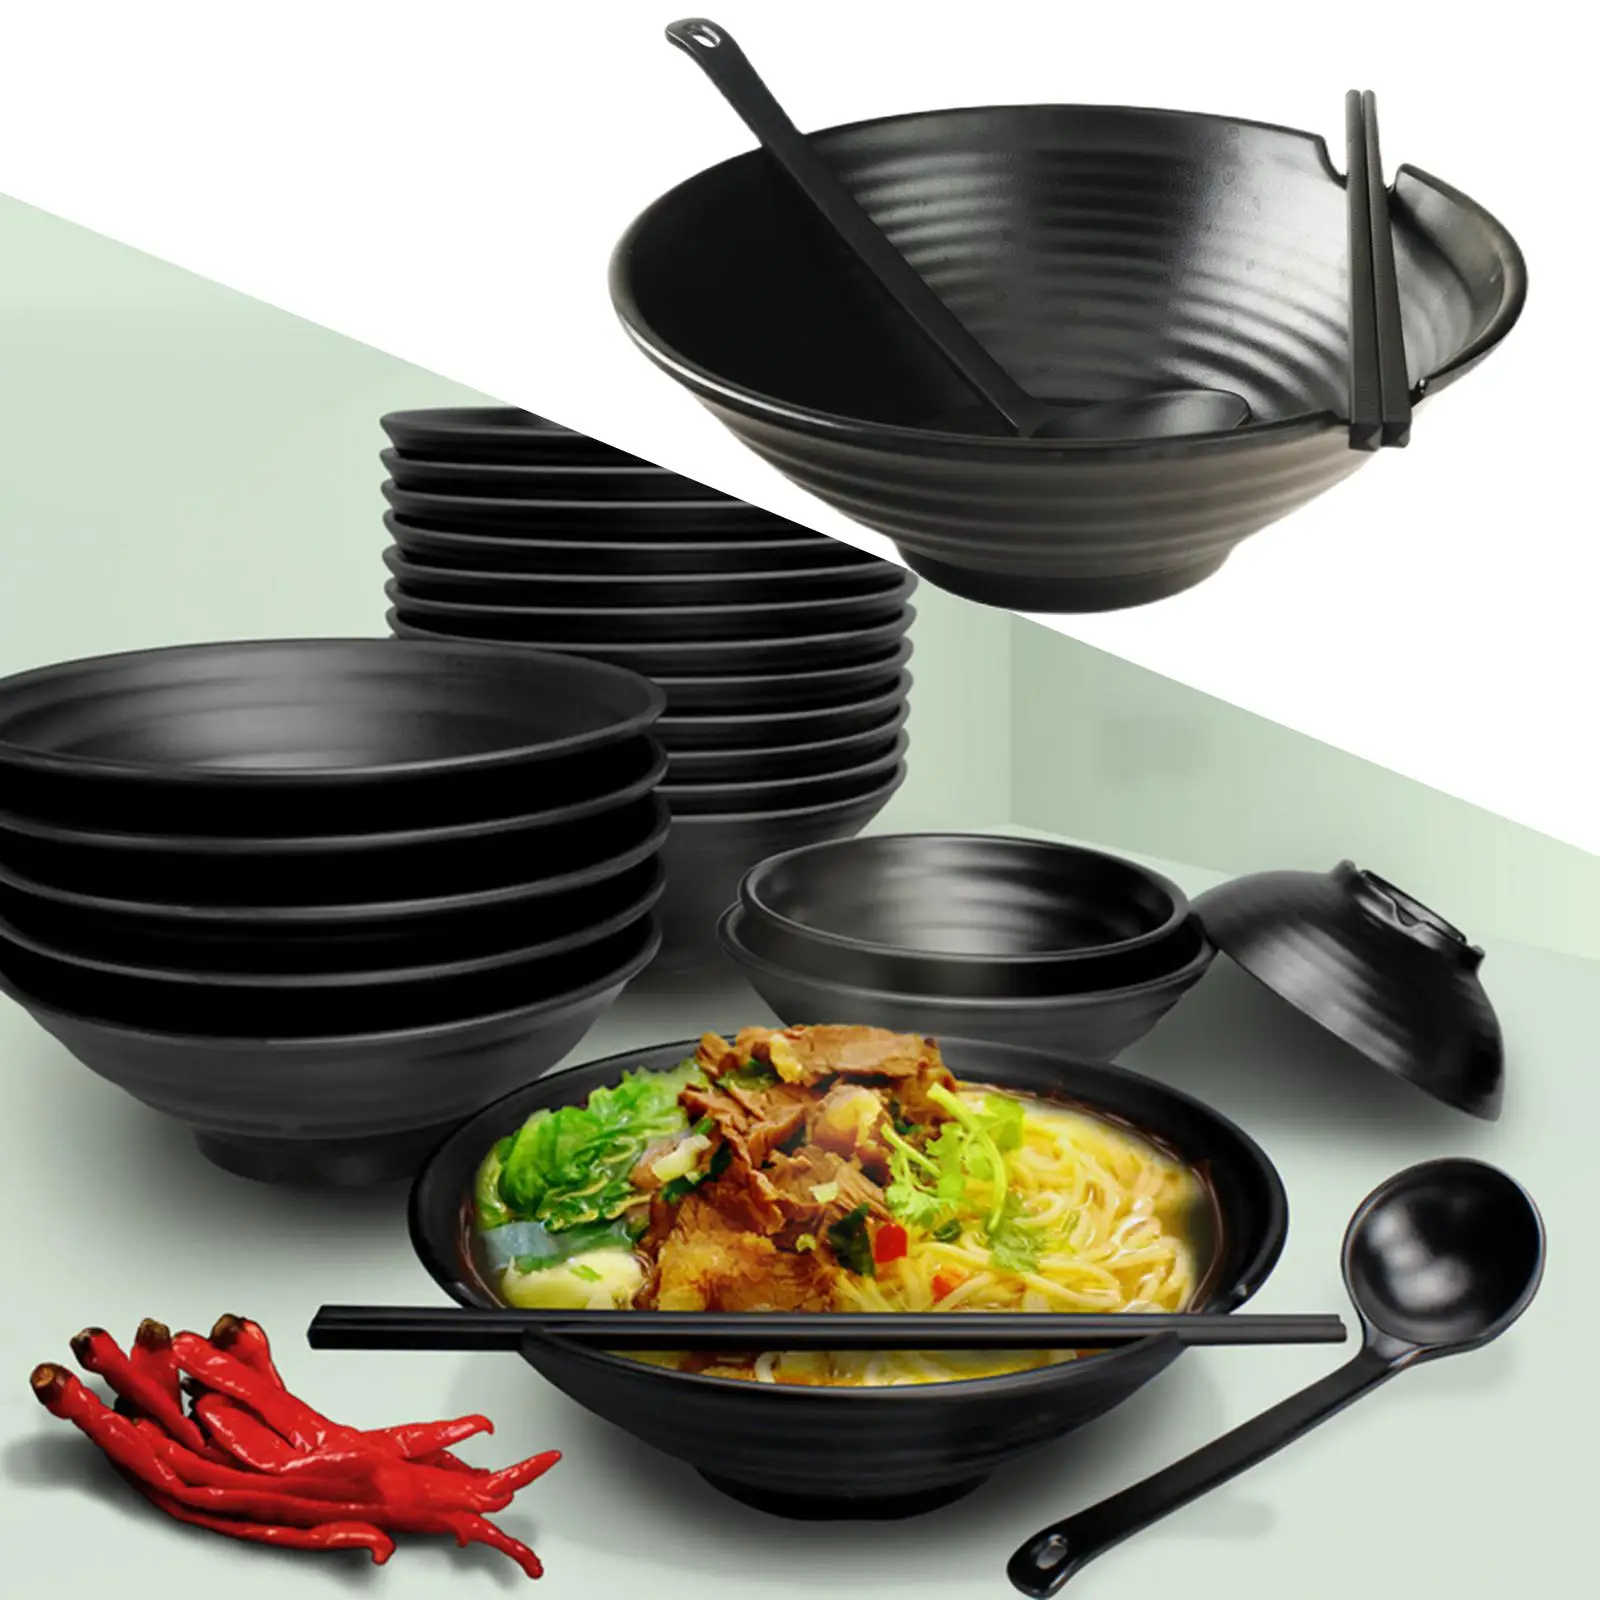 1 Set(4 PCS) Ceramic Japanese Ramen Bowls for Soup, Noodle, Pho, Udon and  Soba, with Matching Spoons, Chopsticks and Racks